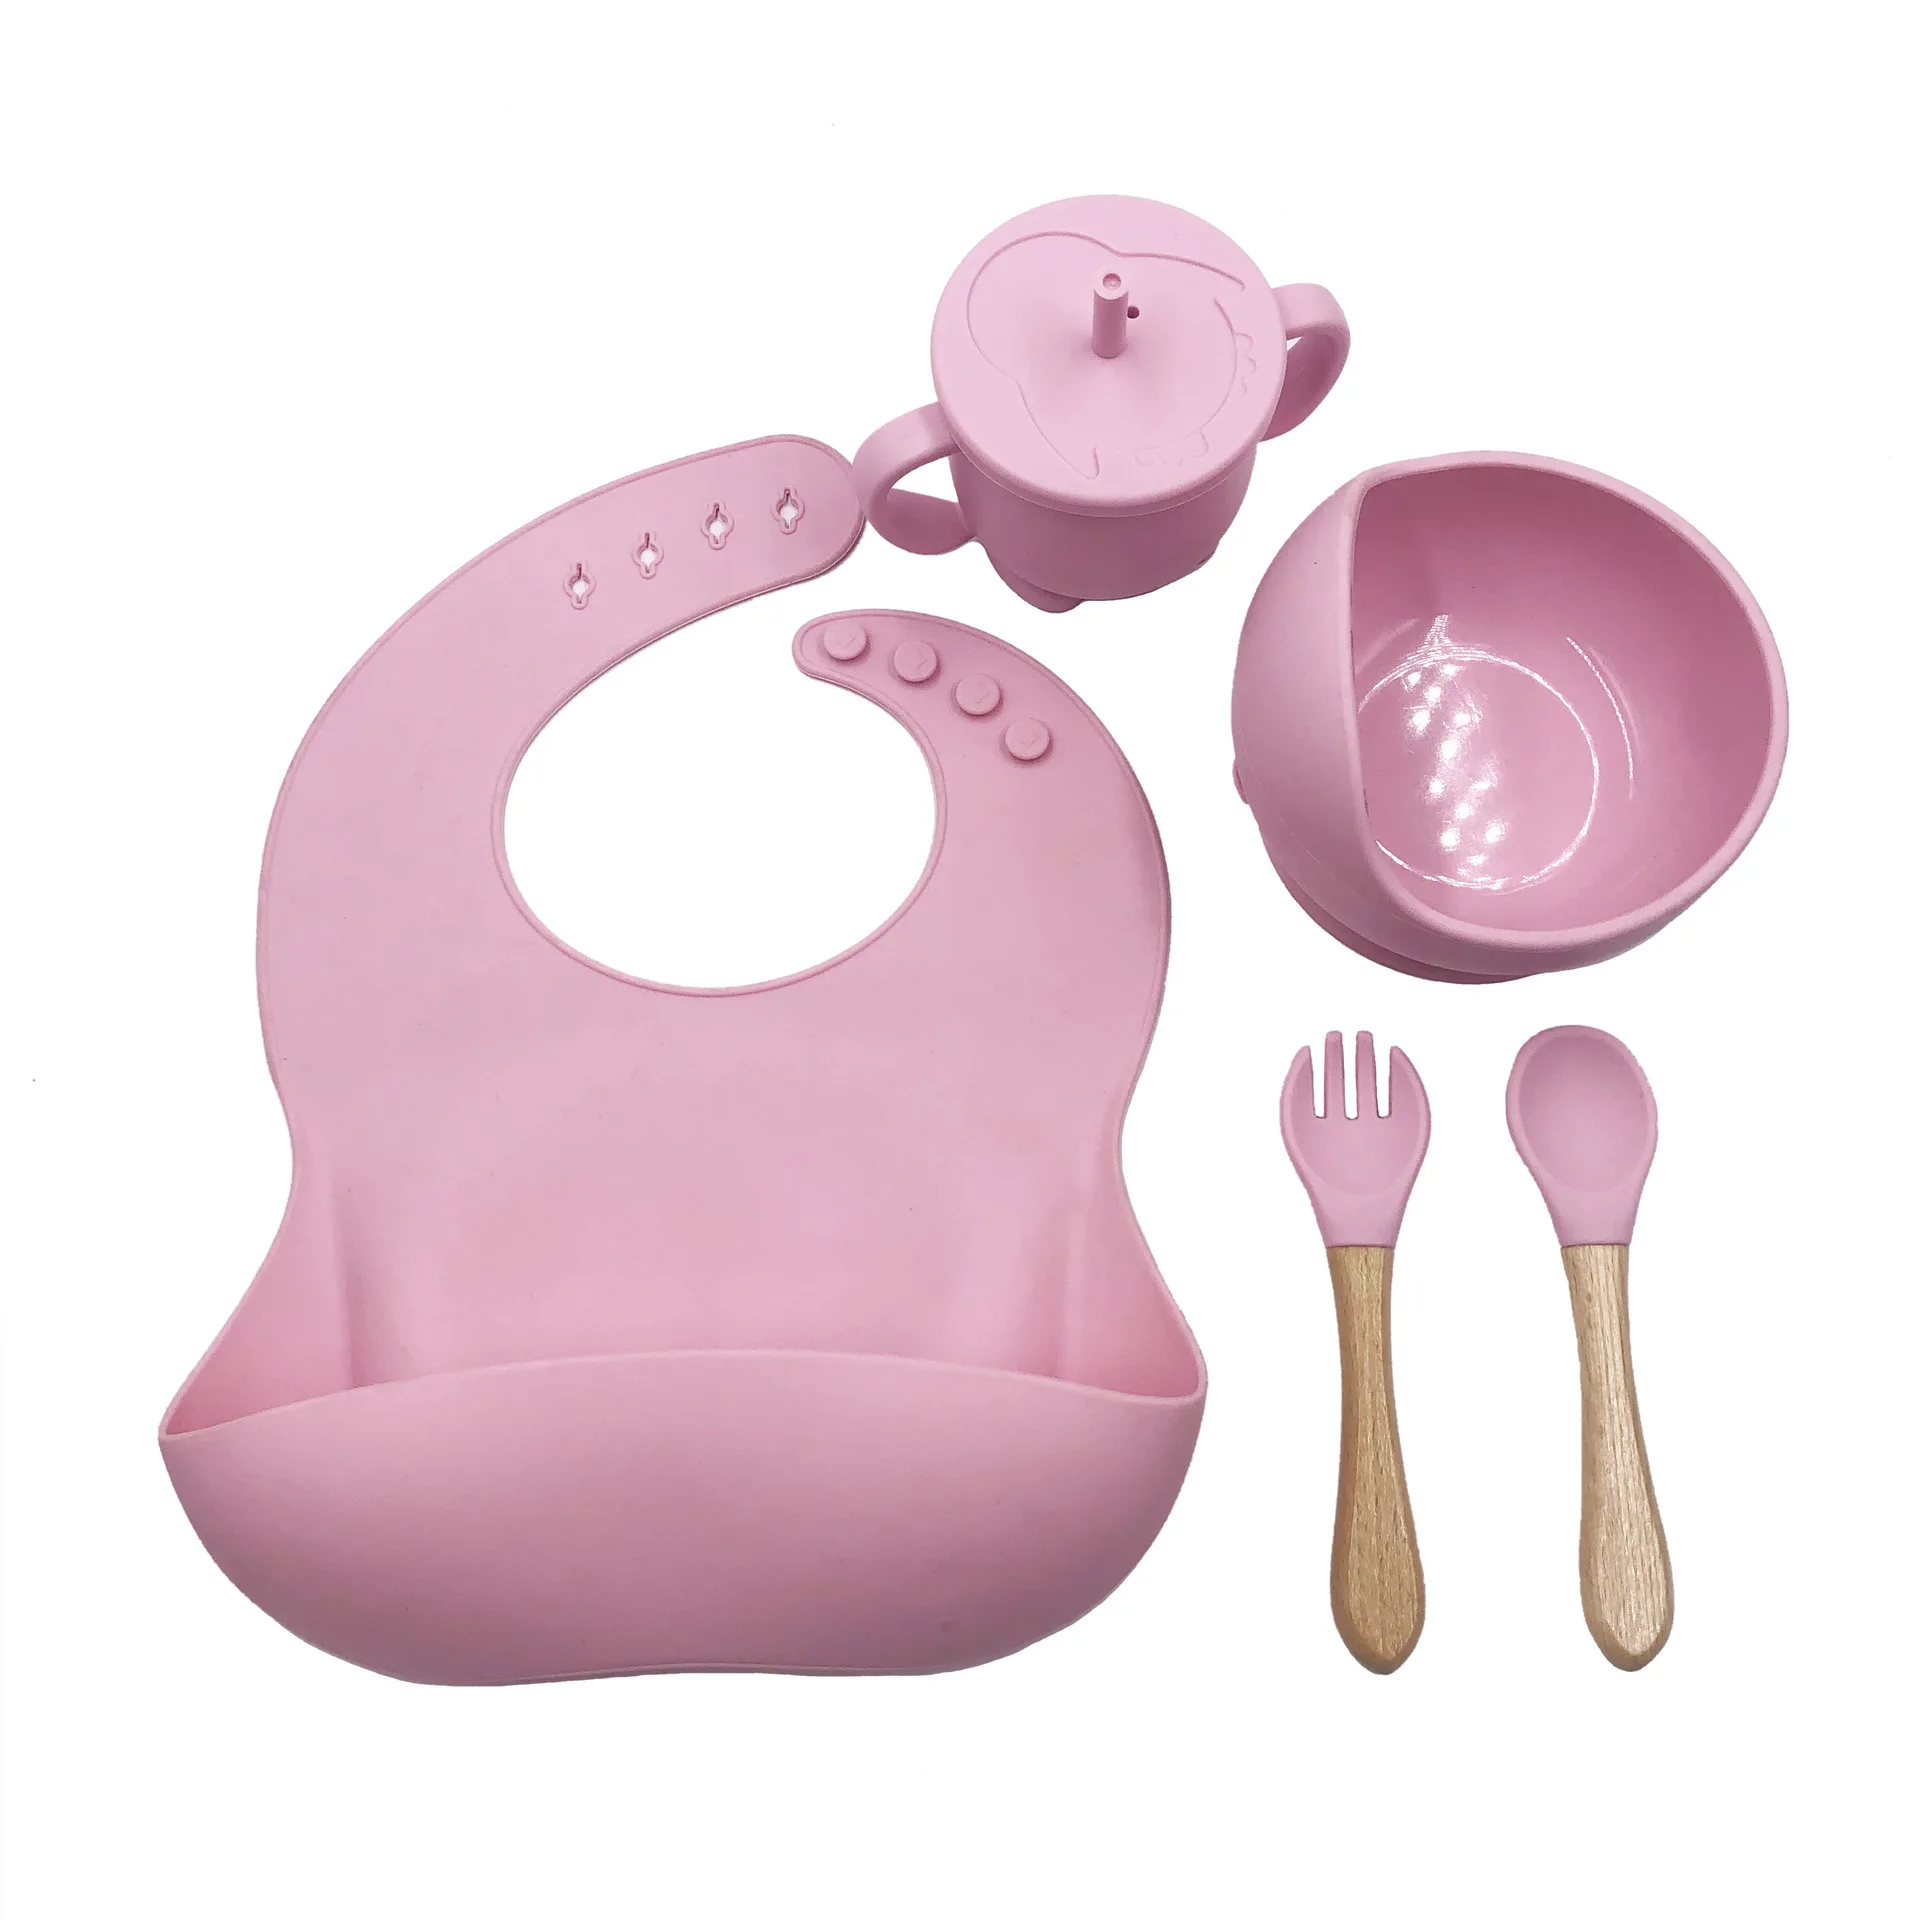 

0540 Children's food supplement bowl, straw cup, saliva pocket, fork spoon, 5-piece set of silicone baby feeding tableware, Many colors are available